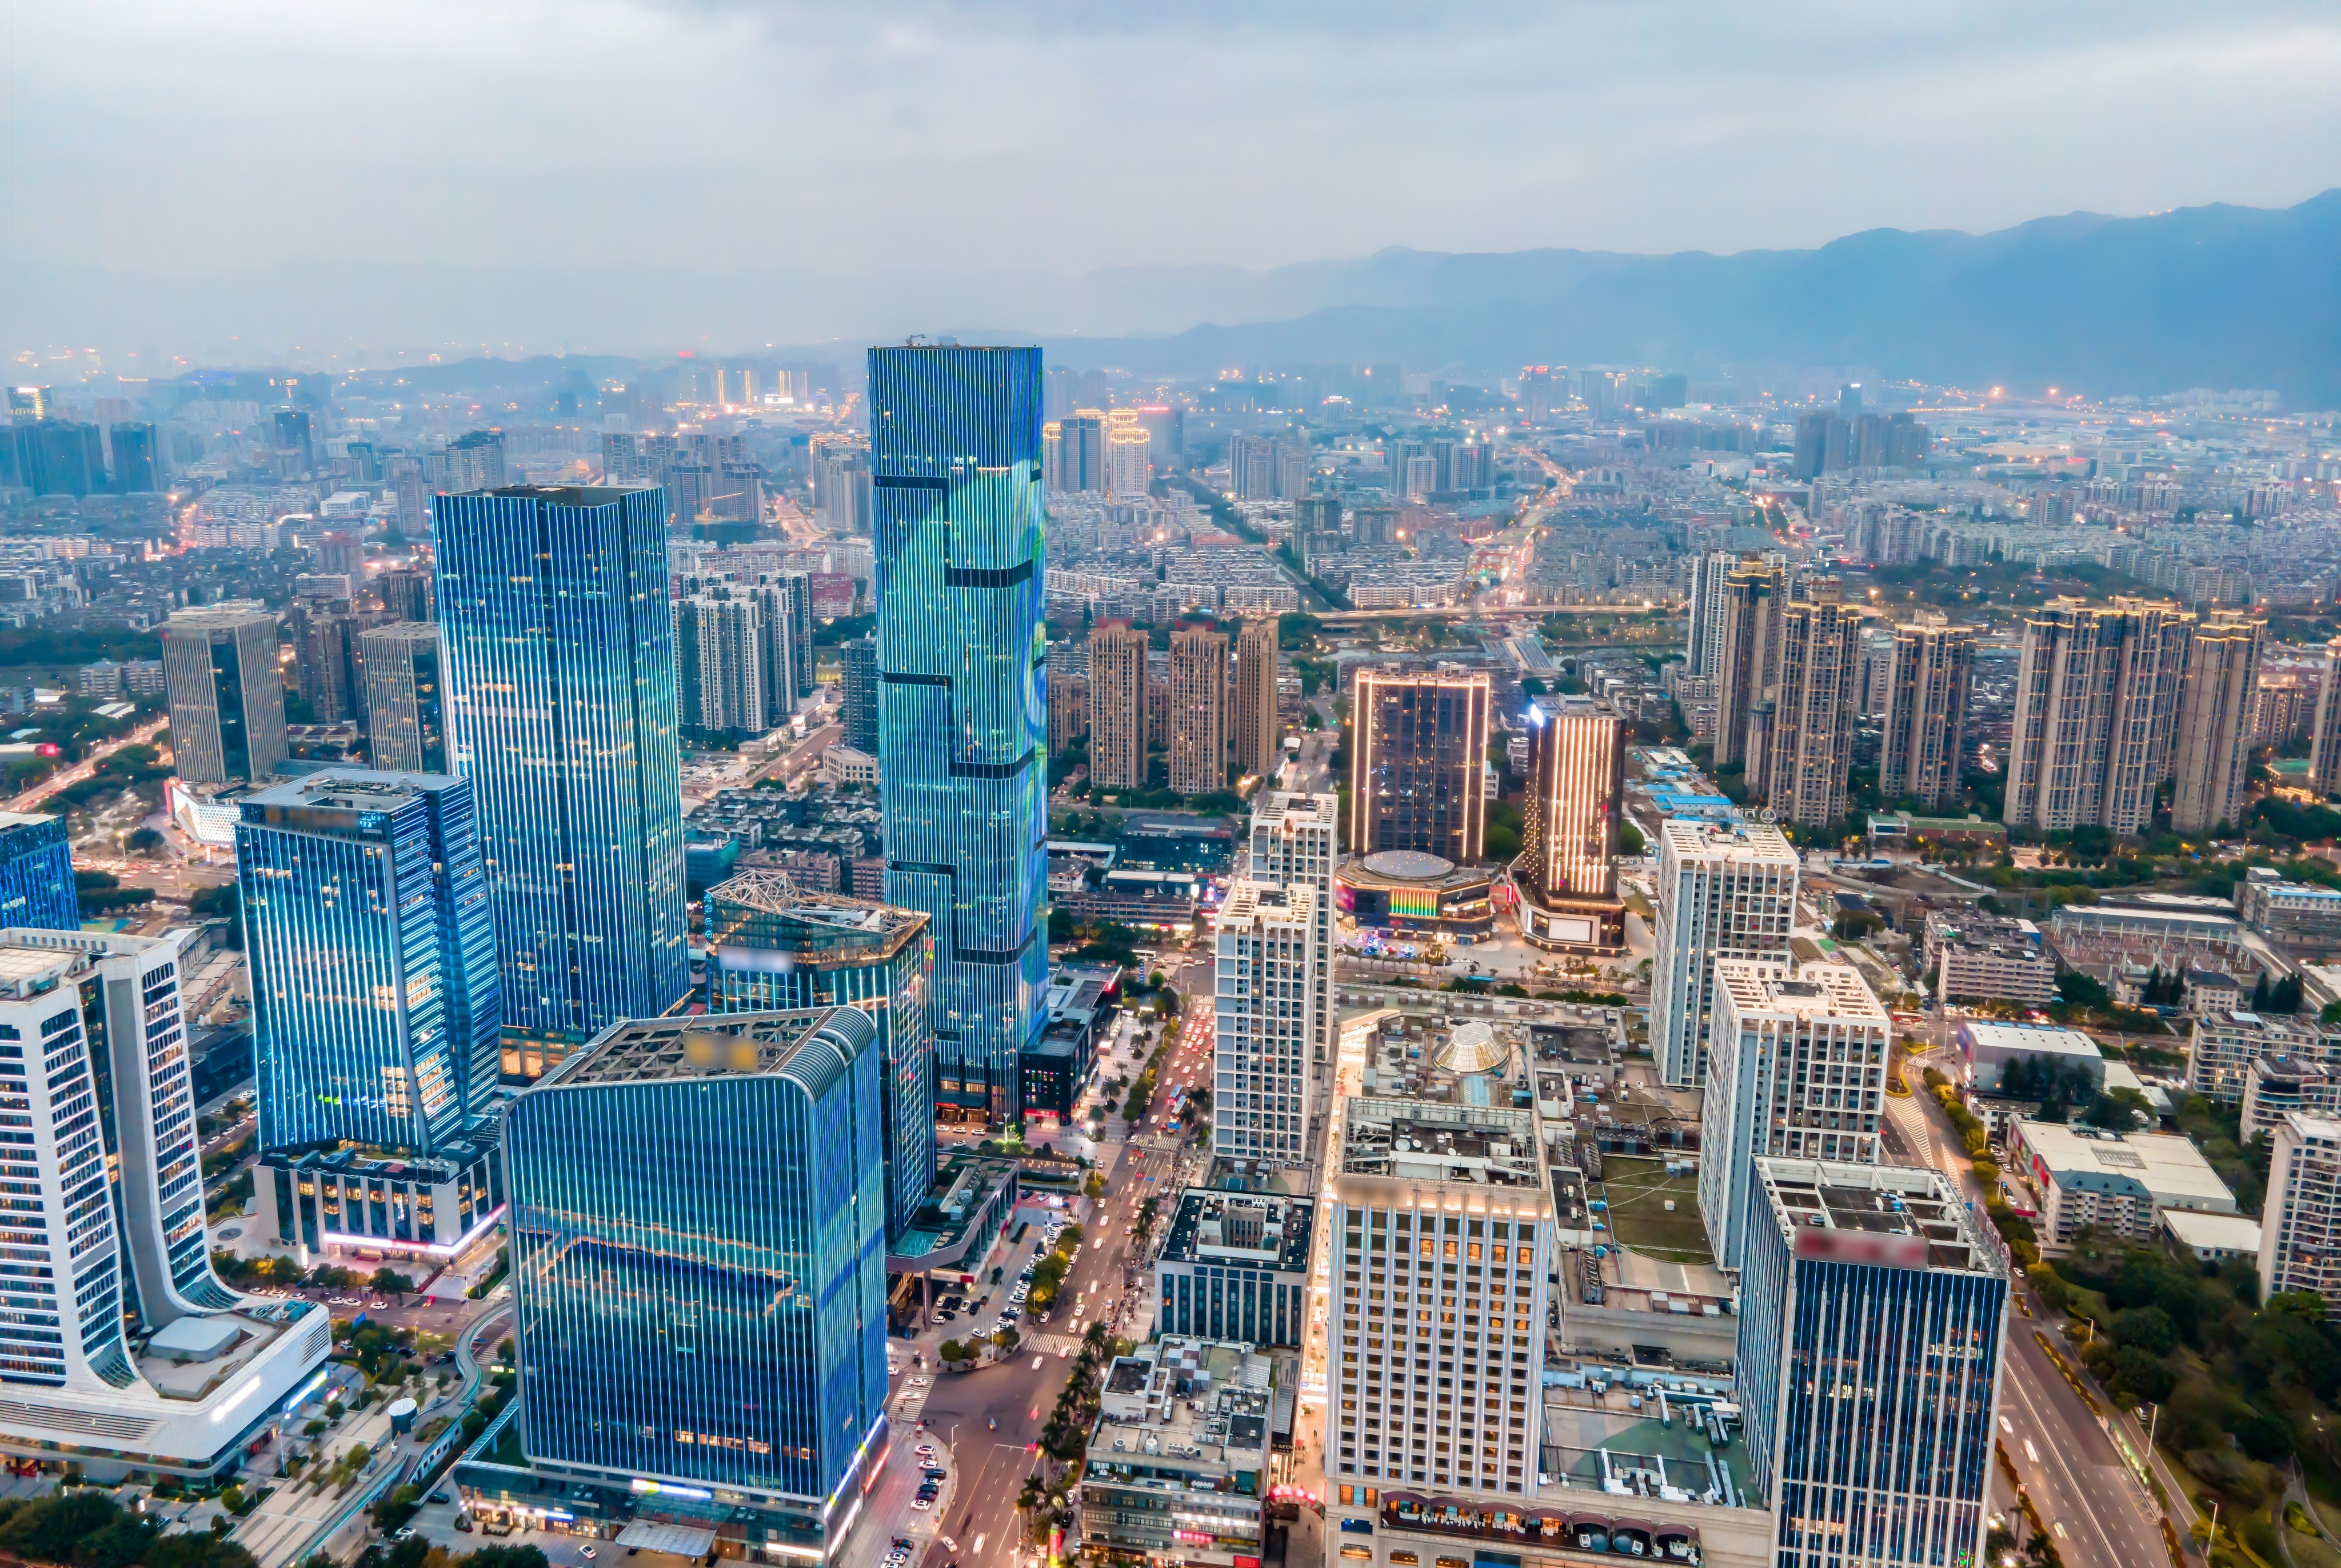 Fuzhou, on the southern coast of mainland China in Fujian province, is offering a wide-ranging package of opportunities for residents of Taiwanese-controlled Matsu. Photo: Shutterstock